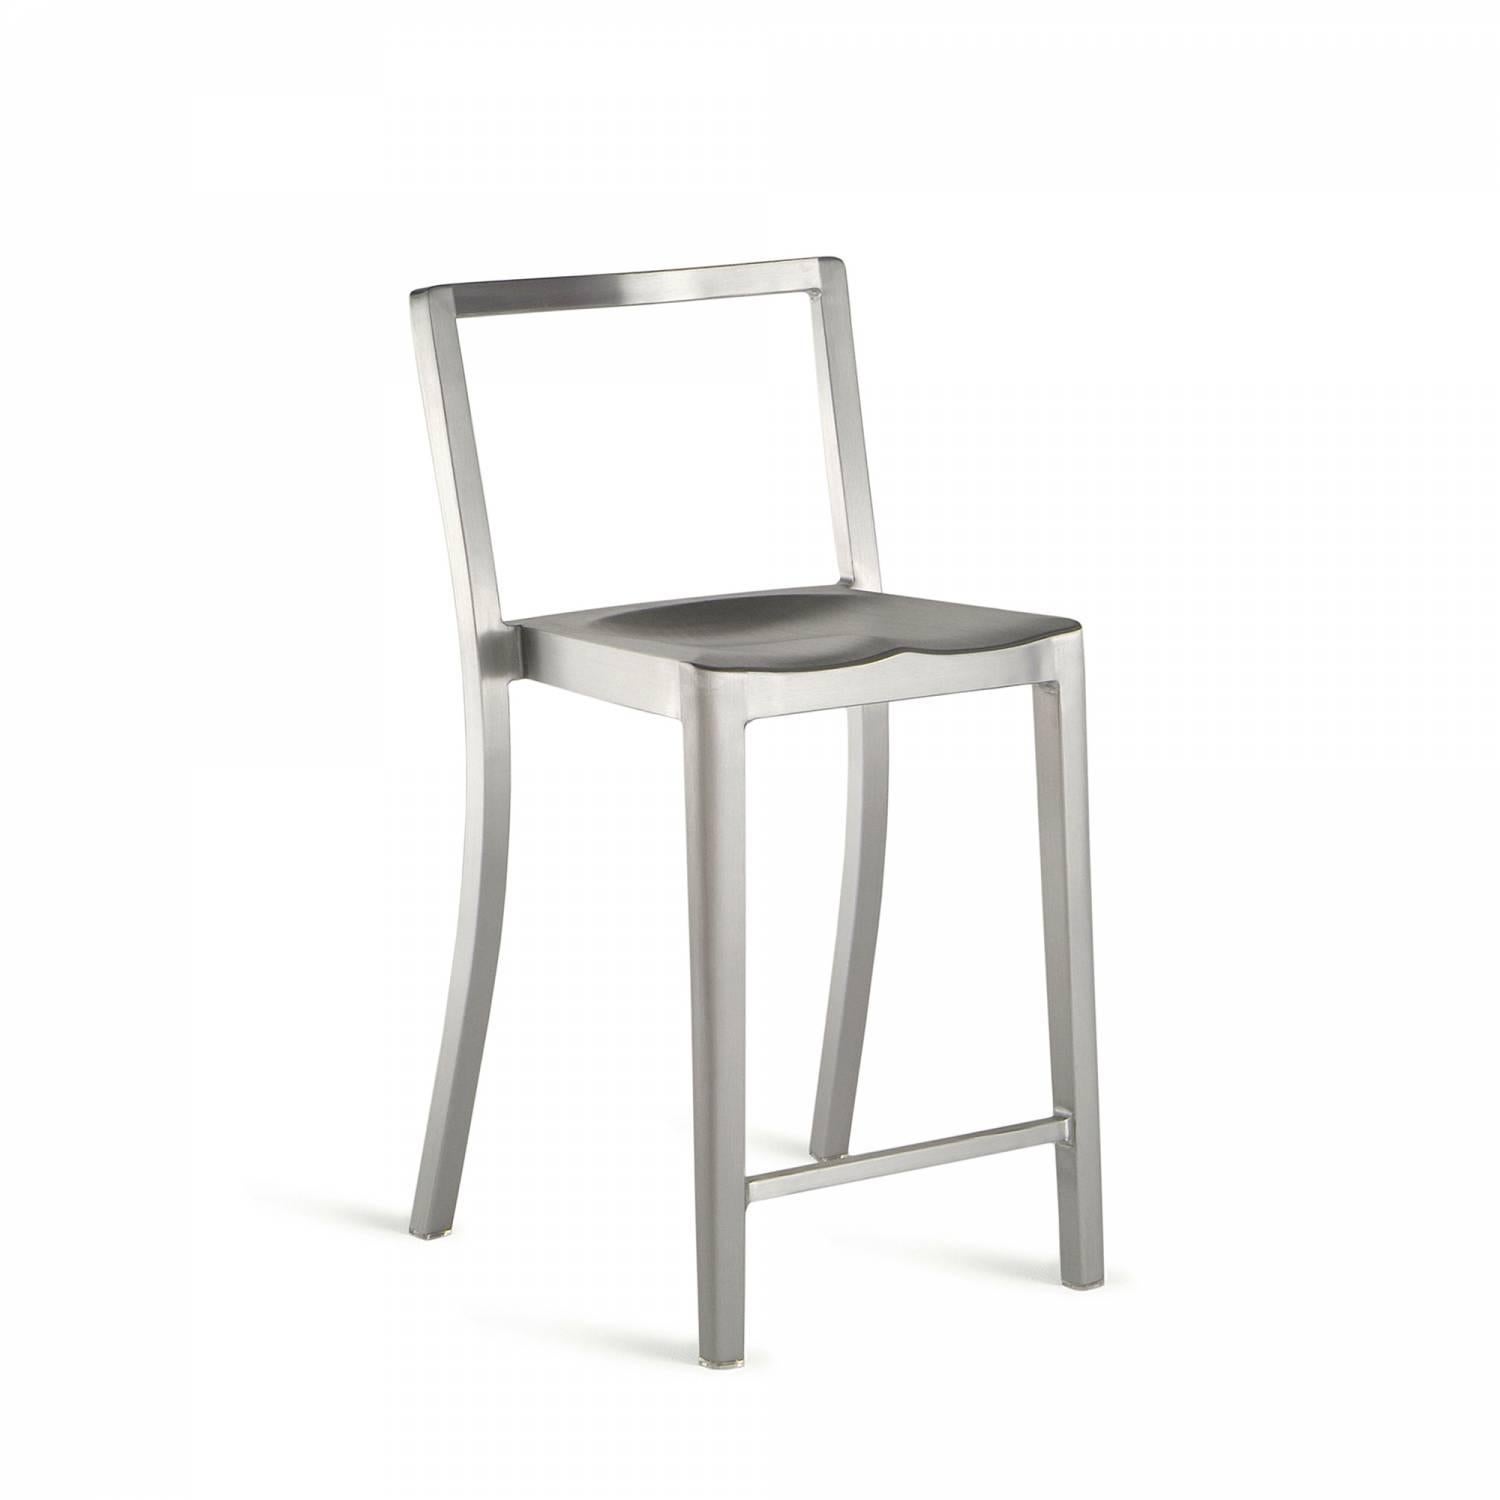 Icon is a stacking chair cousin to the famous Starck designed Hudson chair. It has been used in hotels, bars and restaurants worldwide, as well as training centers, meeting areas and schools. Starck describes Icon as “the chair I see when I close my